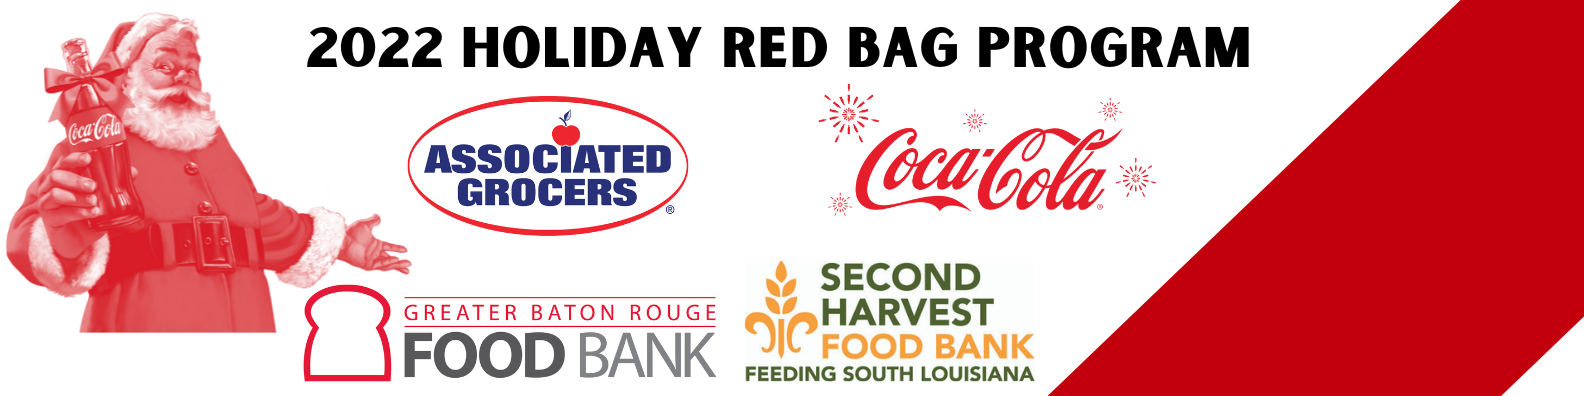 2022 Holiday Red Bag Program, sponsored by Associated Grocers and Coca-Cola.